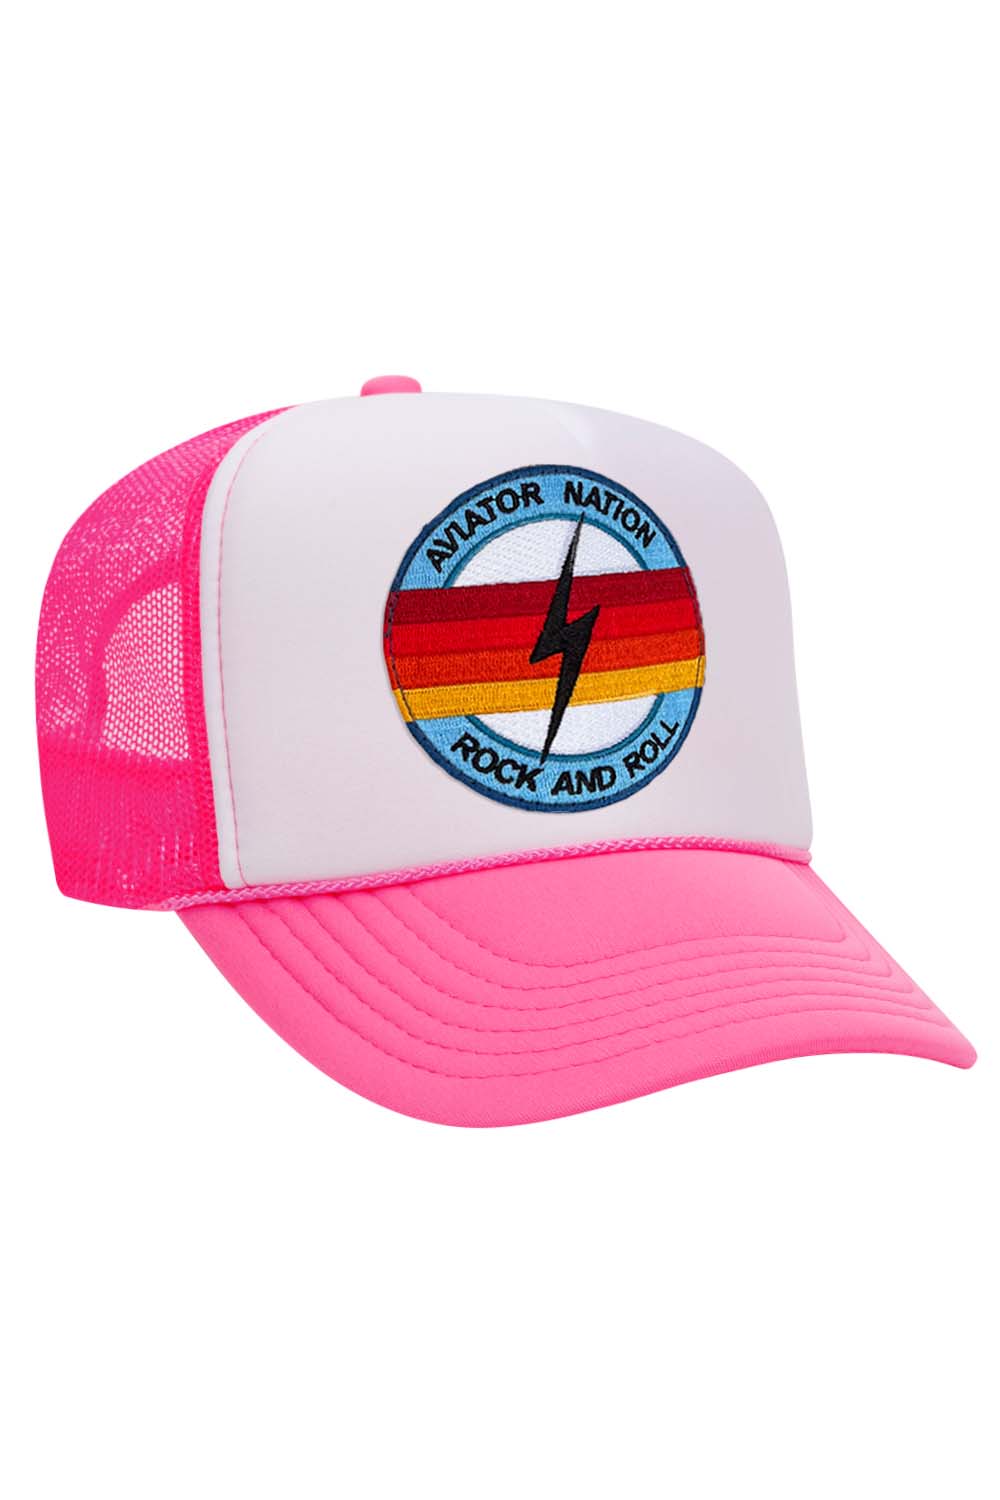 ROCK AND ROLL BOLT VINTAGE TRUCKER HAT HATS Aviator Nation NEON PINK // WHITE // NEON PINK 